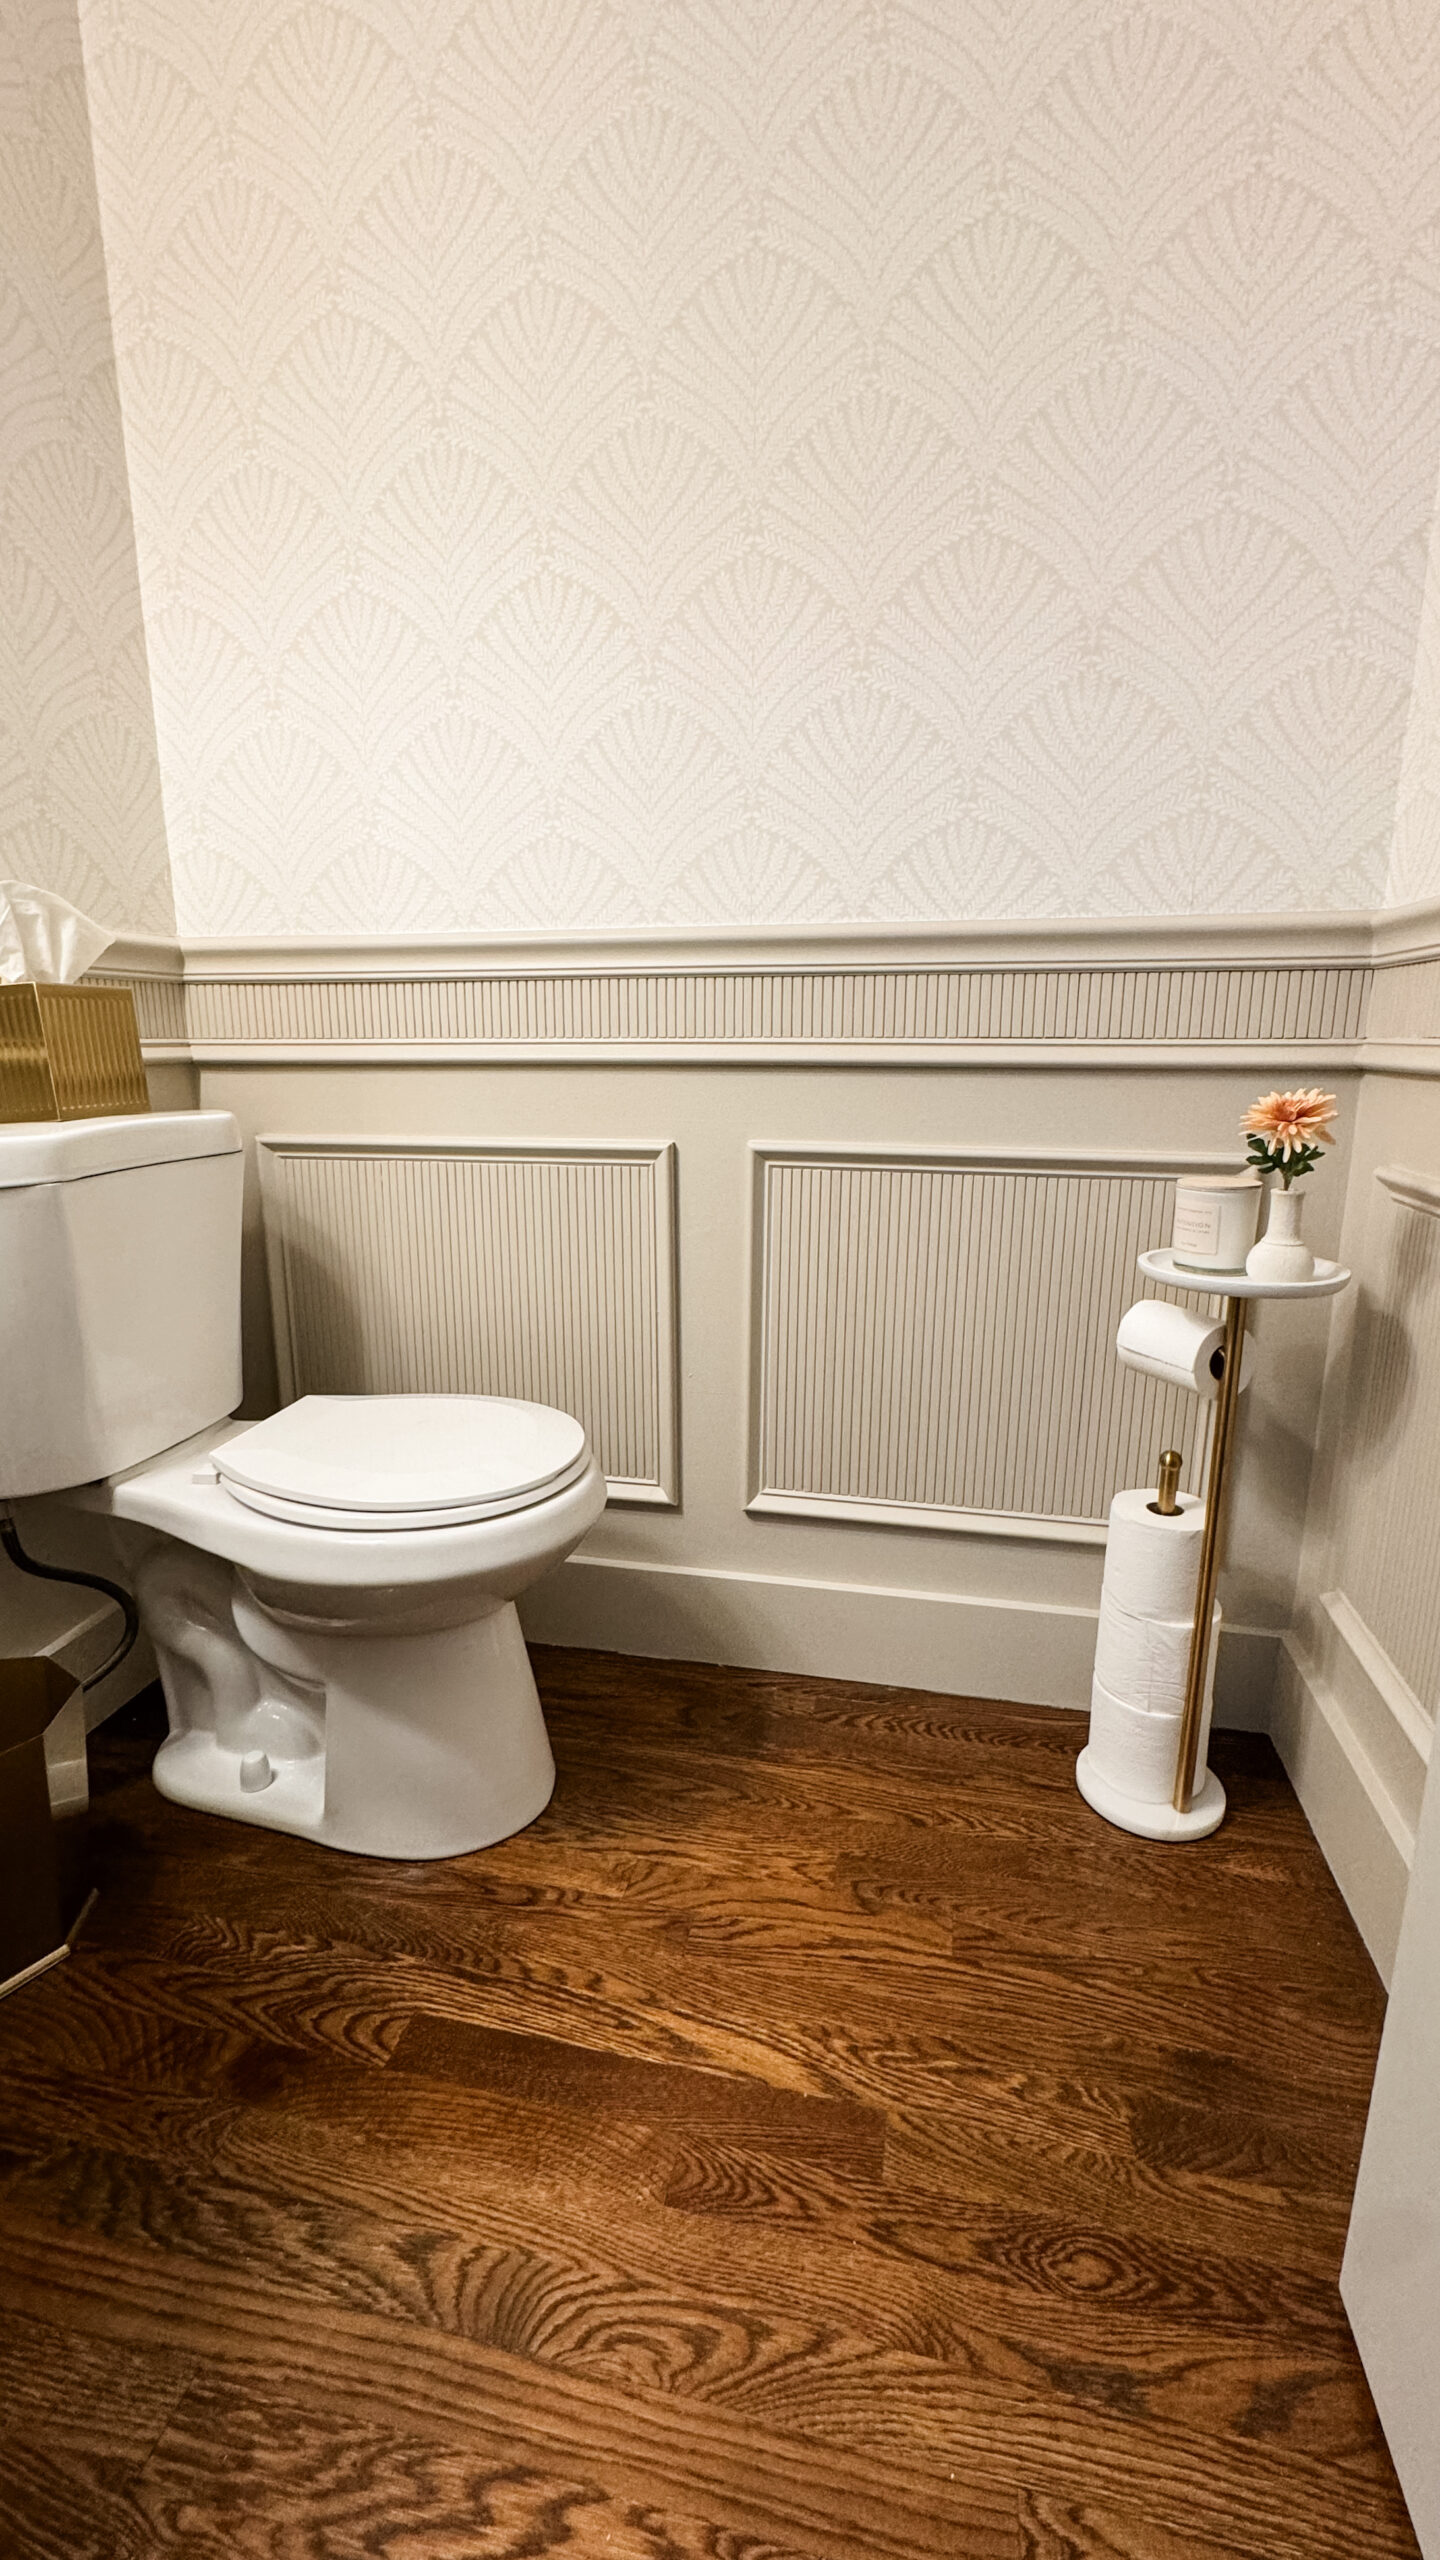 Wainscoting - The Timeless Trim